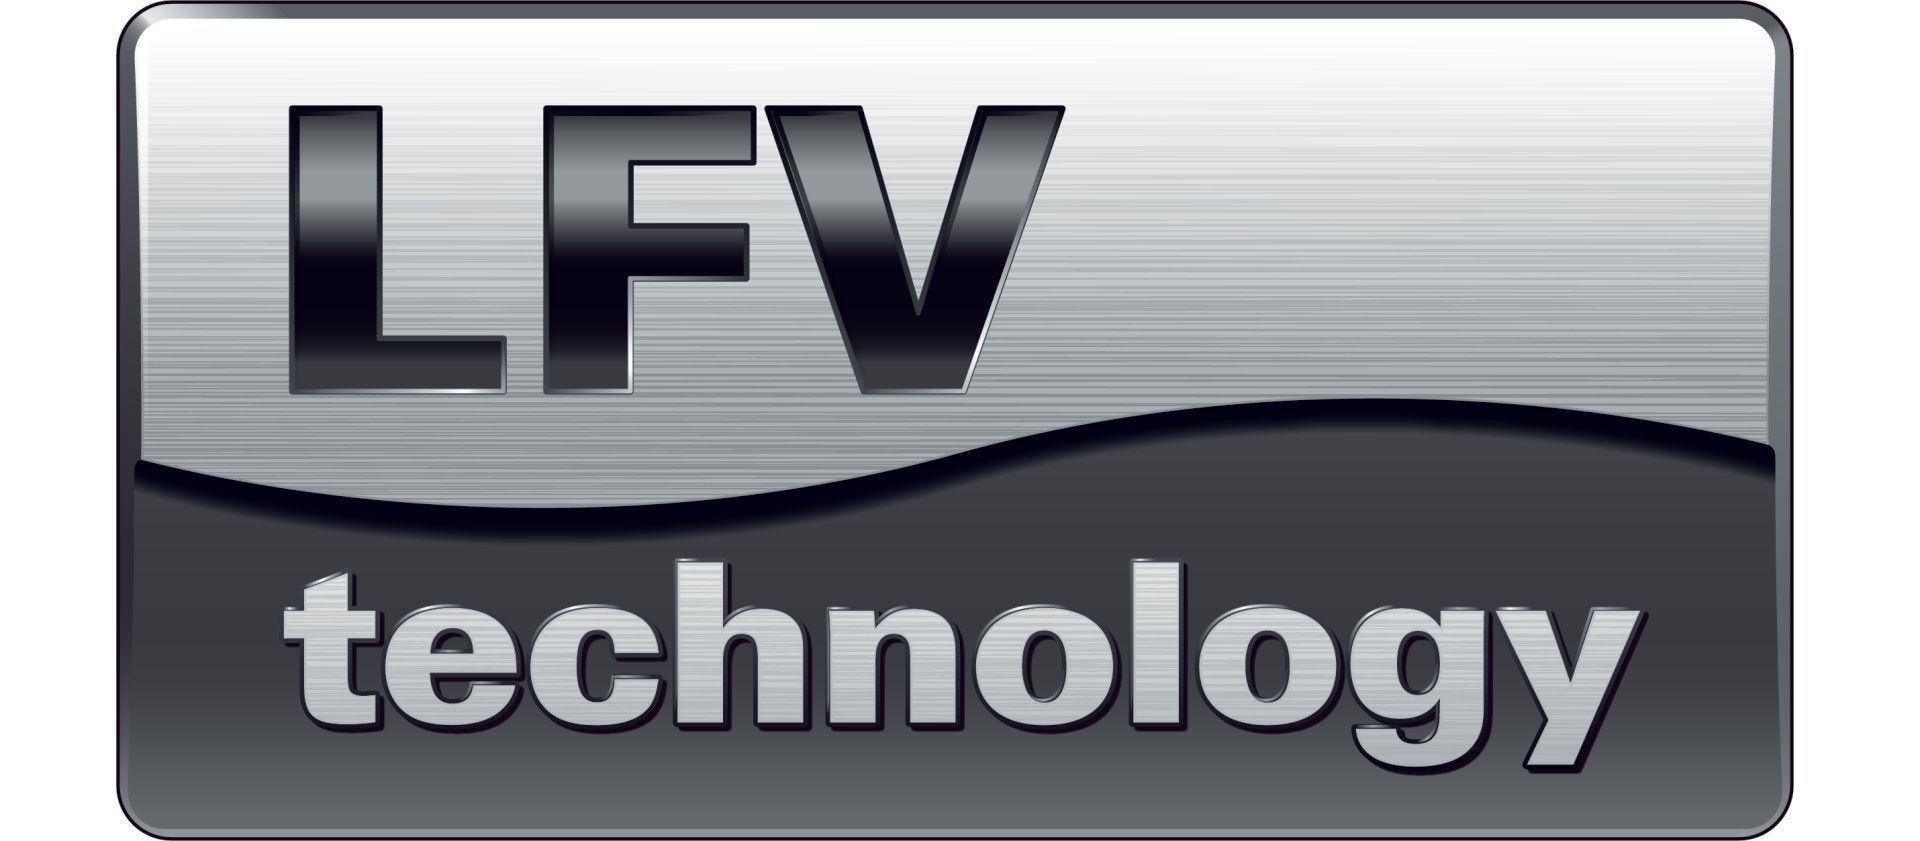 Citizen LFV (Low Frequency Vibration) Technology